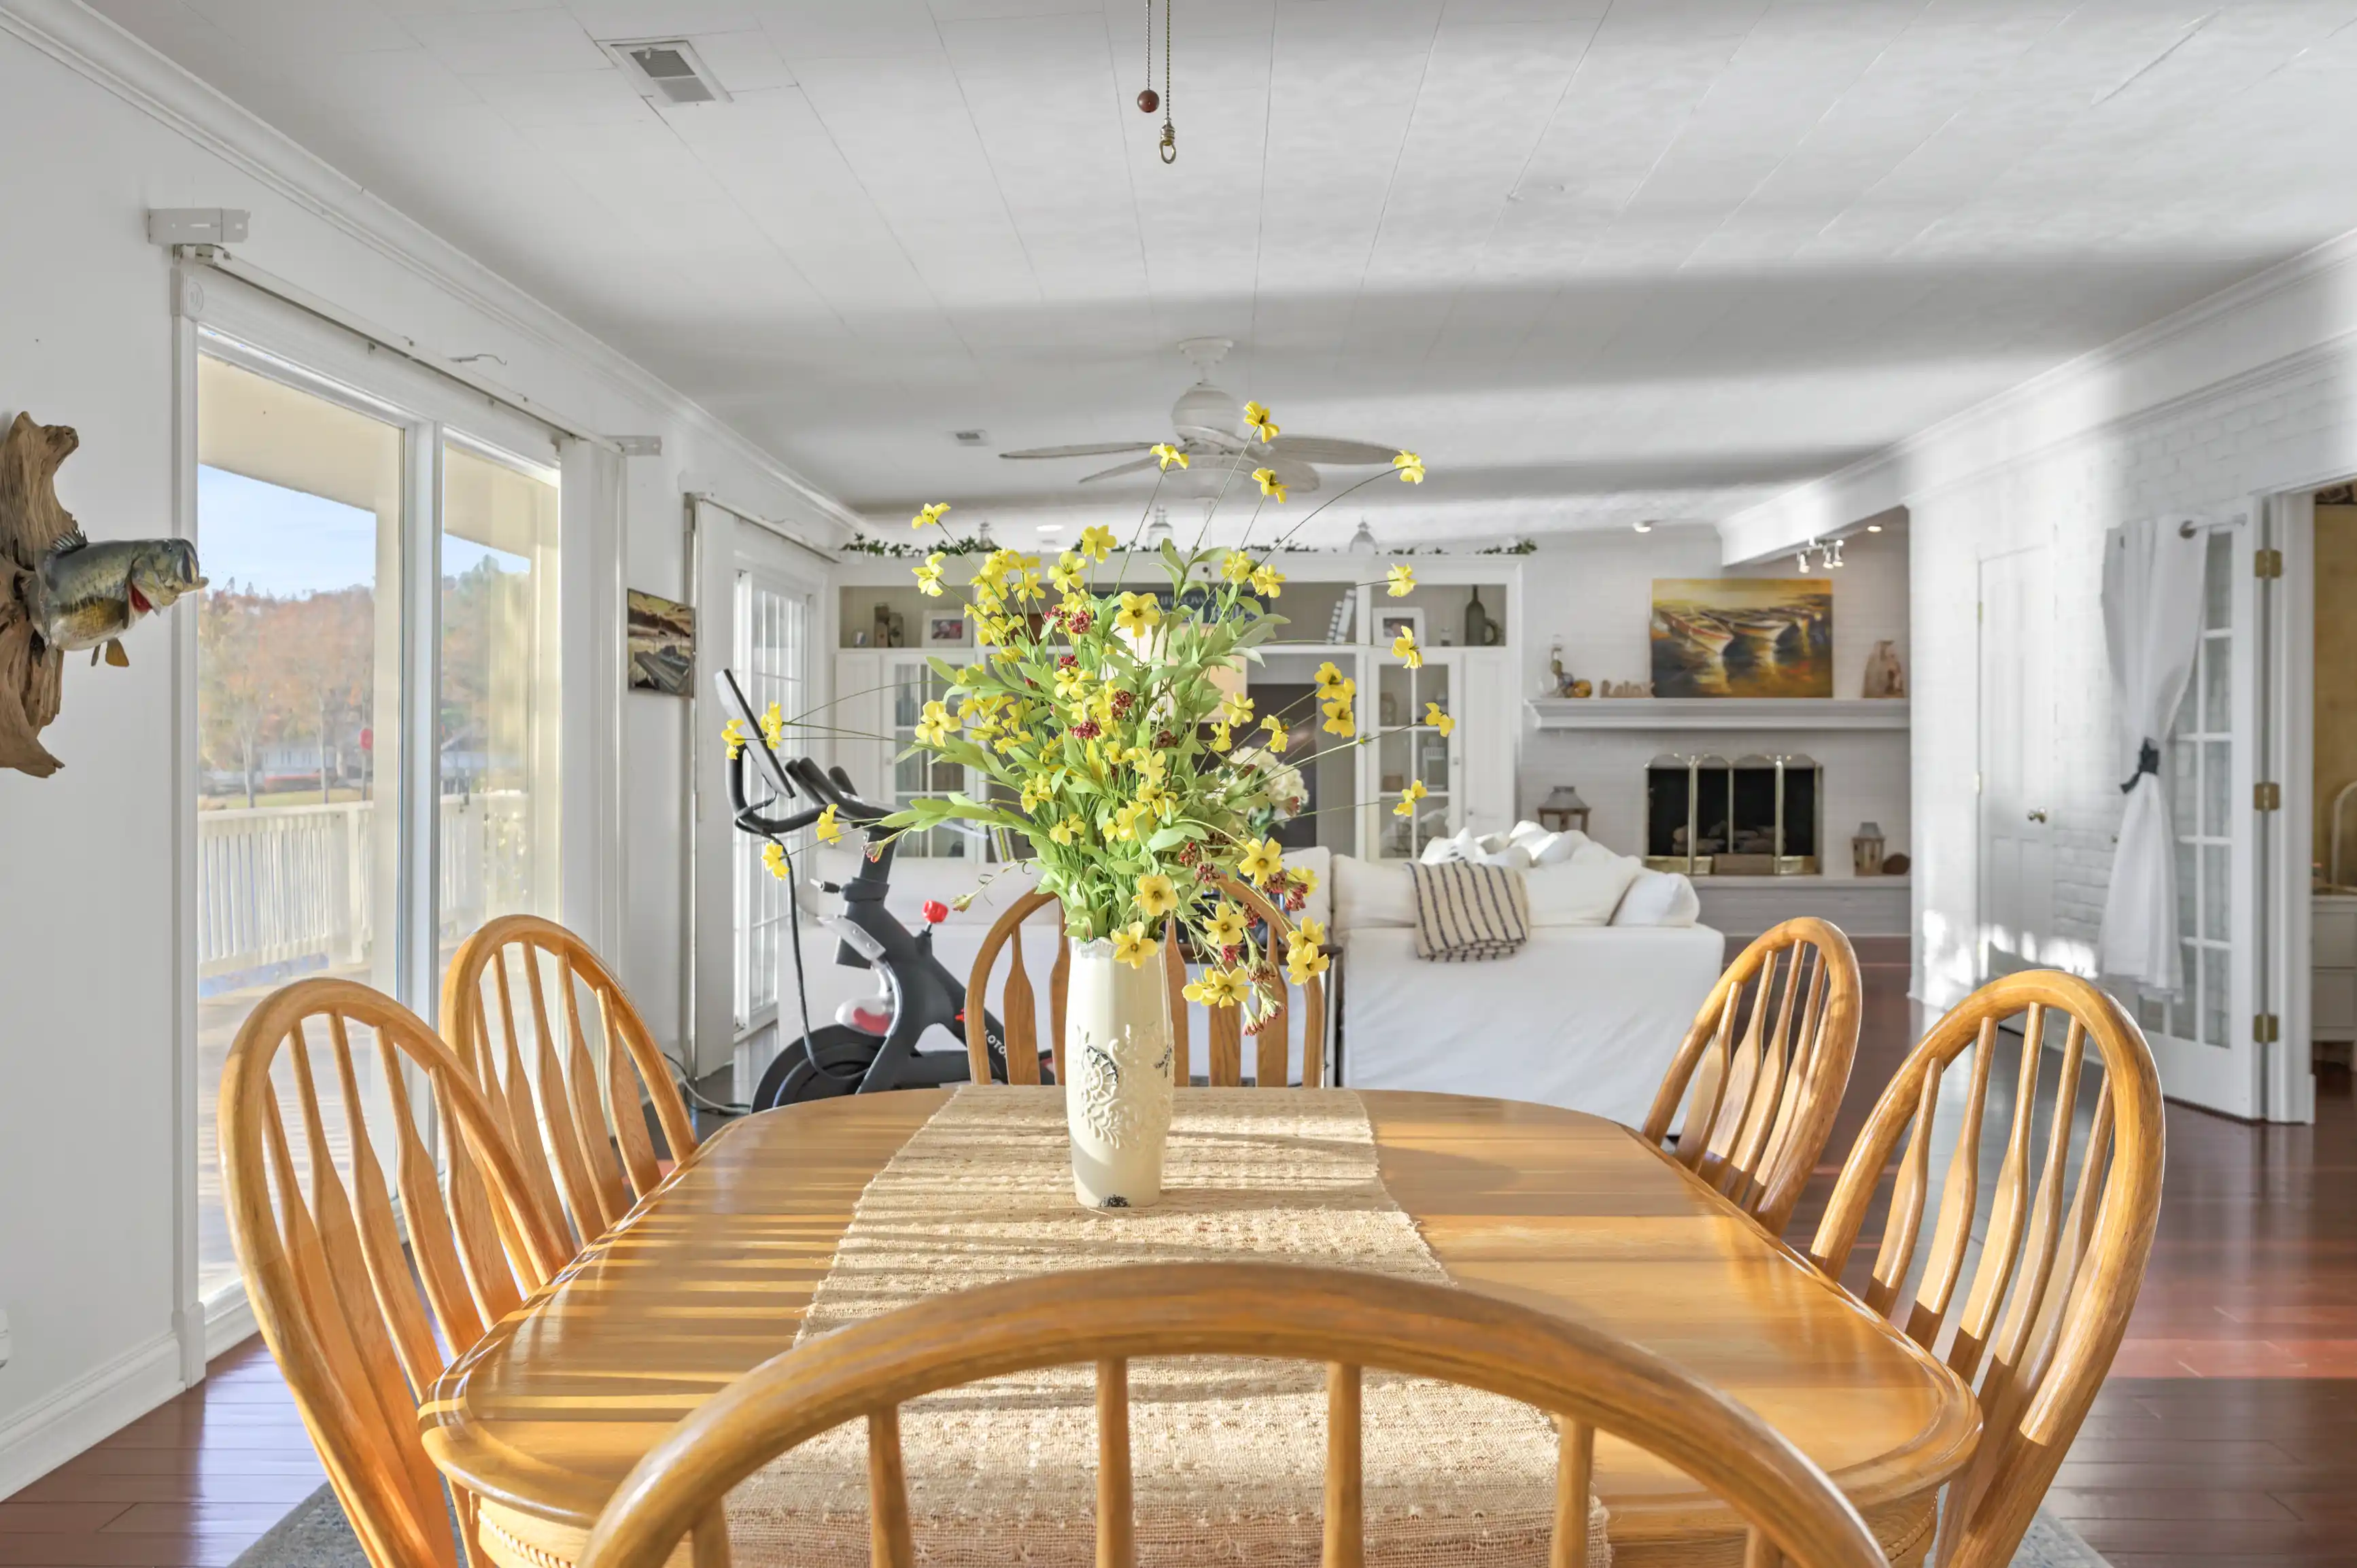 Bright and airy dining room with a wooden table and chairs, a large vase with yellow flowers, and a living area in the background with a white couch and fireplace.